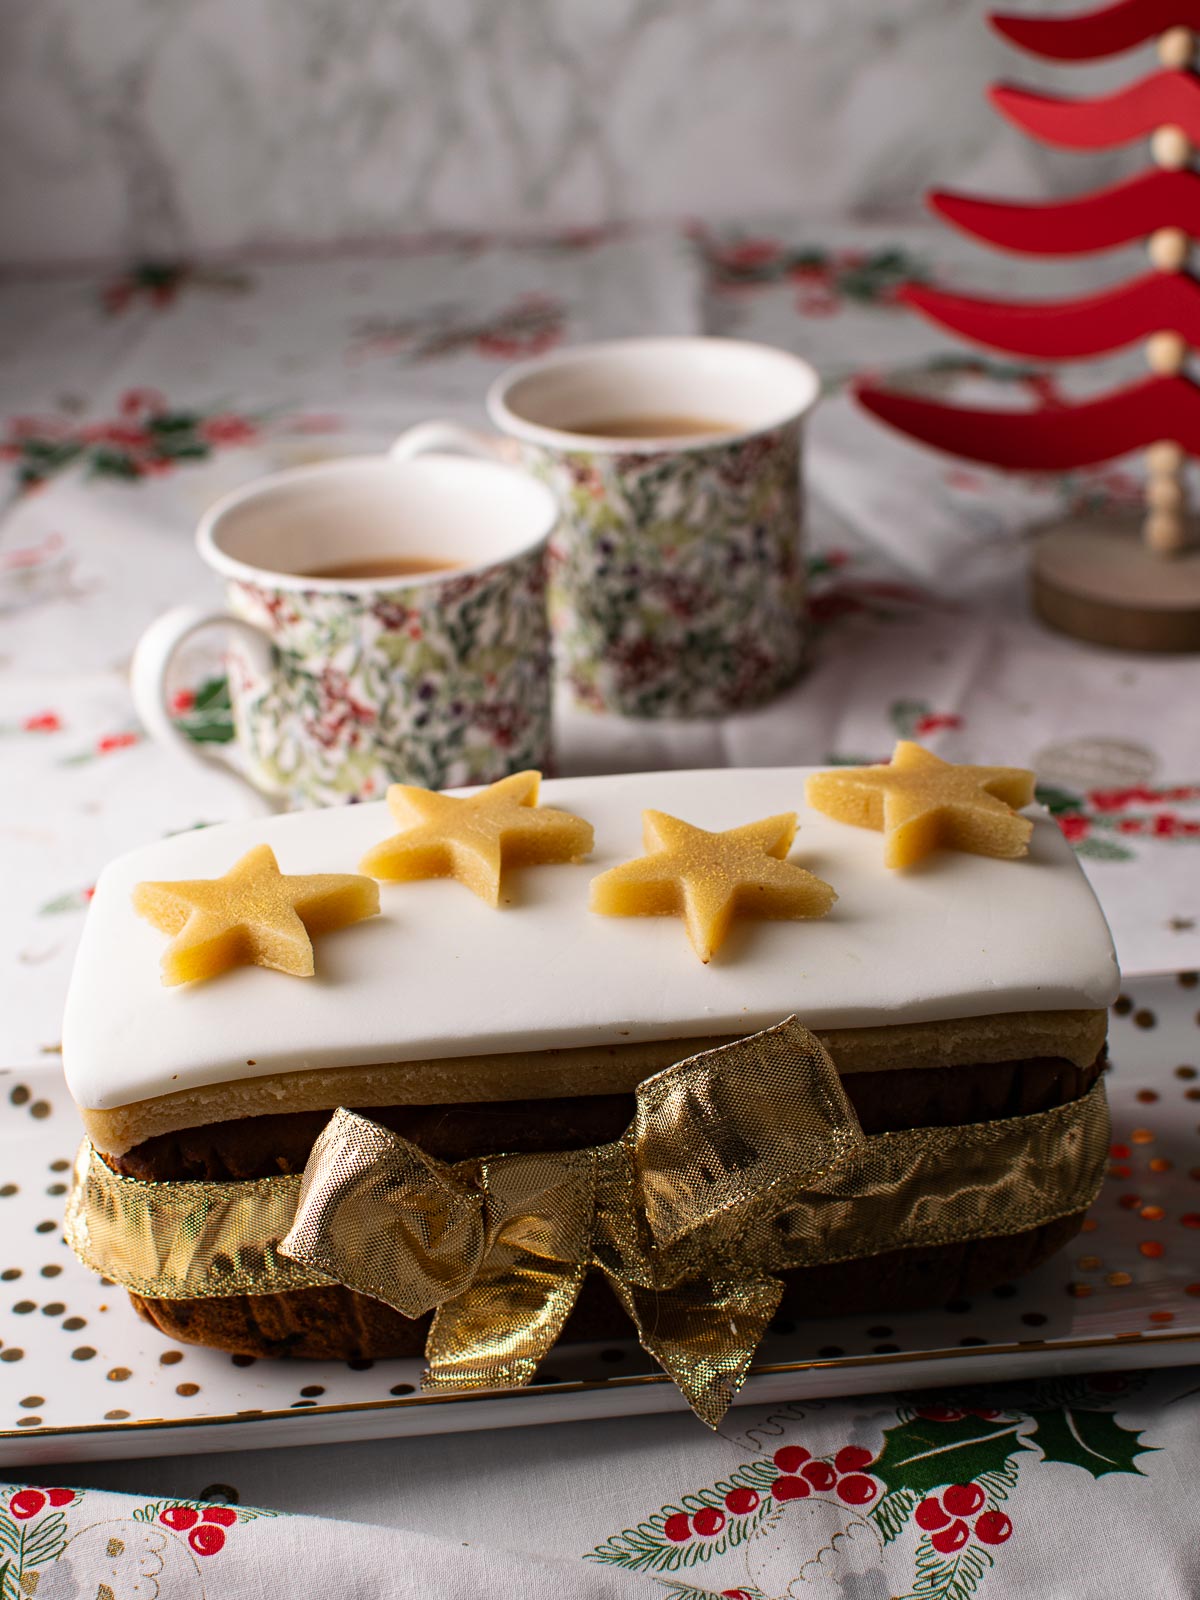 Small Christmas Loaf Cake decorated with marzipan, icing and marzipan stars. Two mugs of tea and a Christmas decorations in the background.